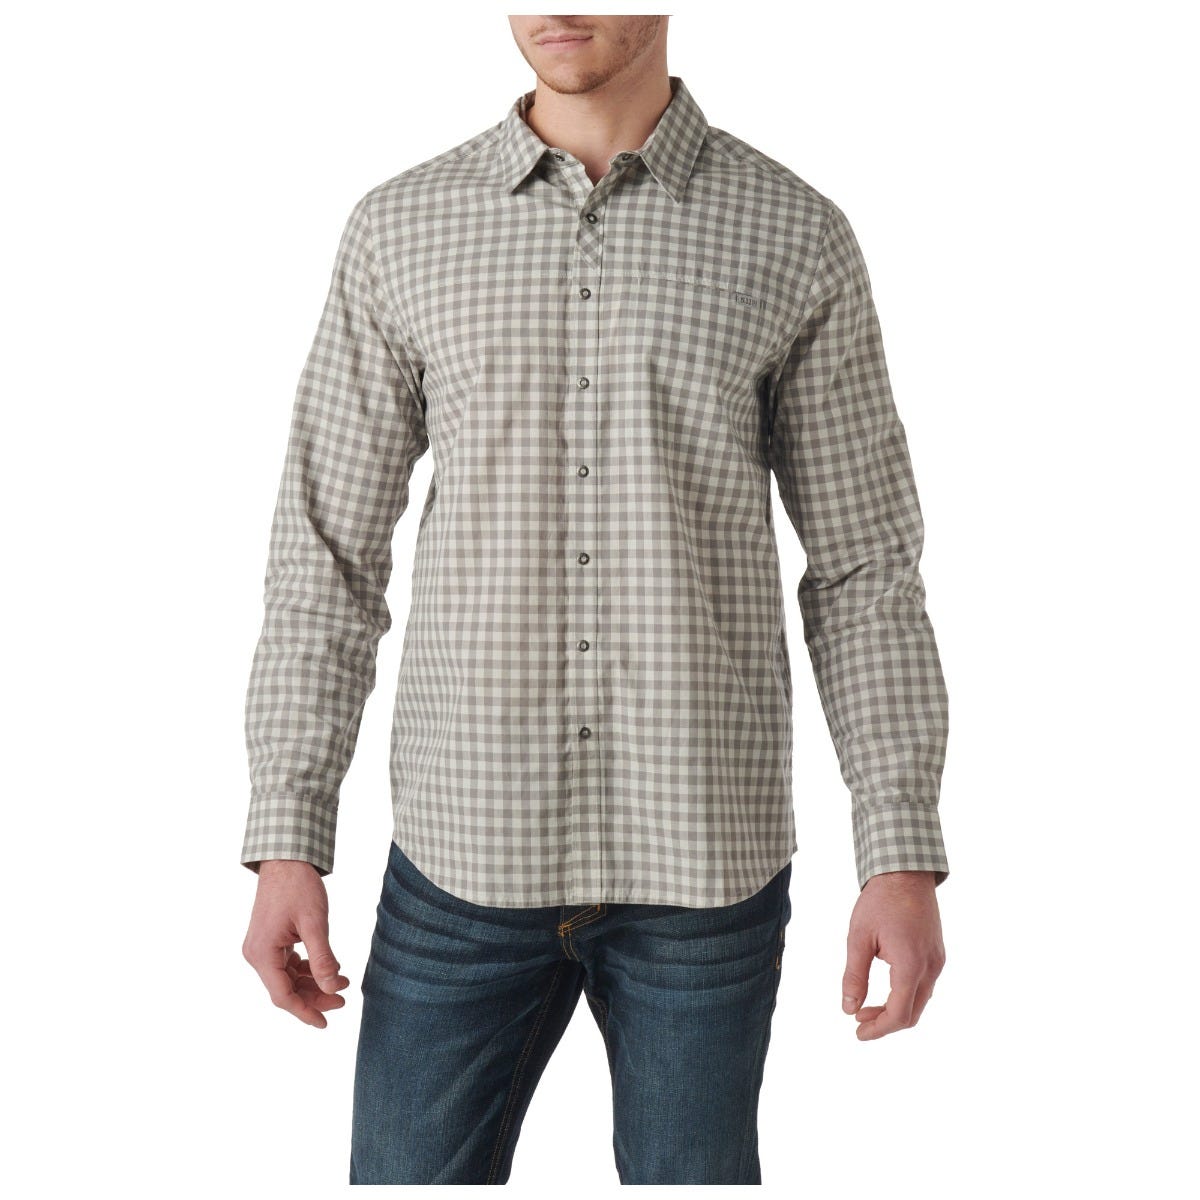 Style 46123T 5.11 Tactical Mens Cotton Twill Station Non-NFPA Class A Long Sleeve Shirt 